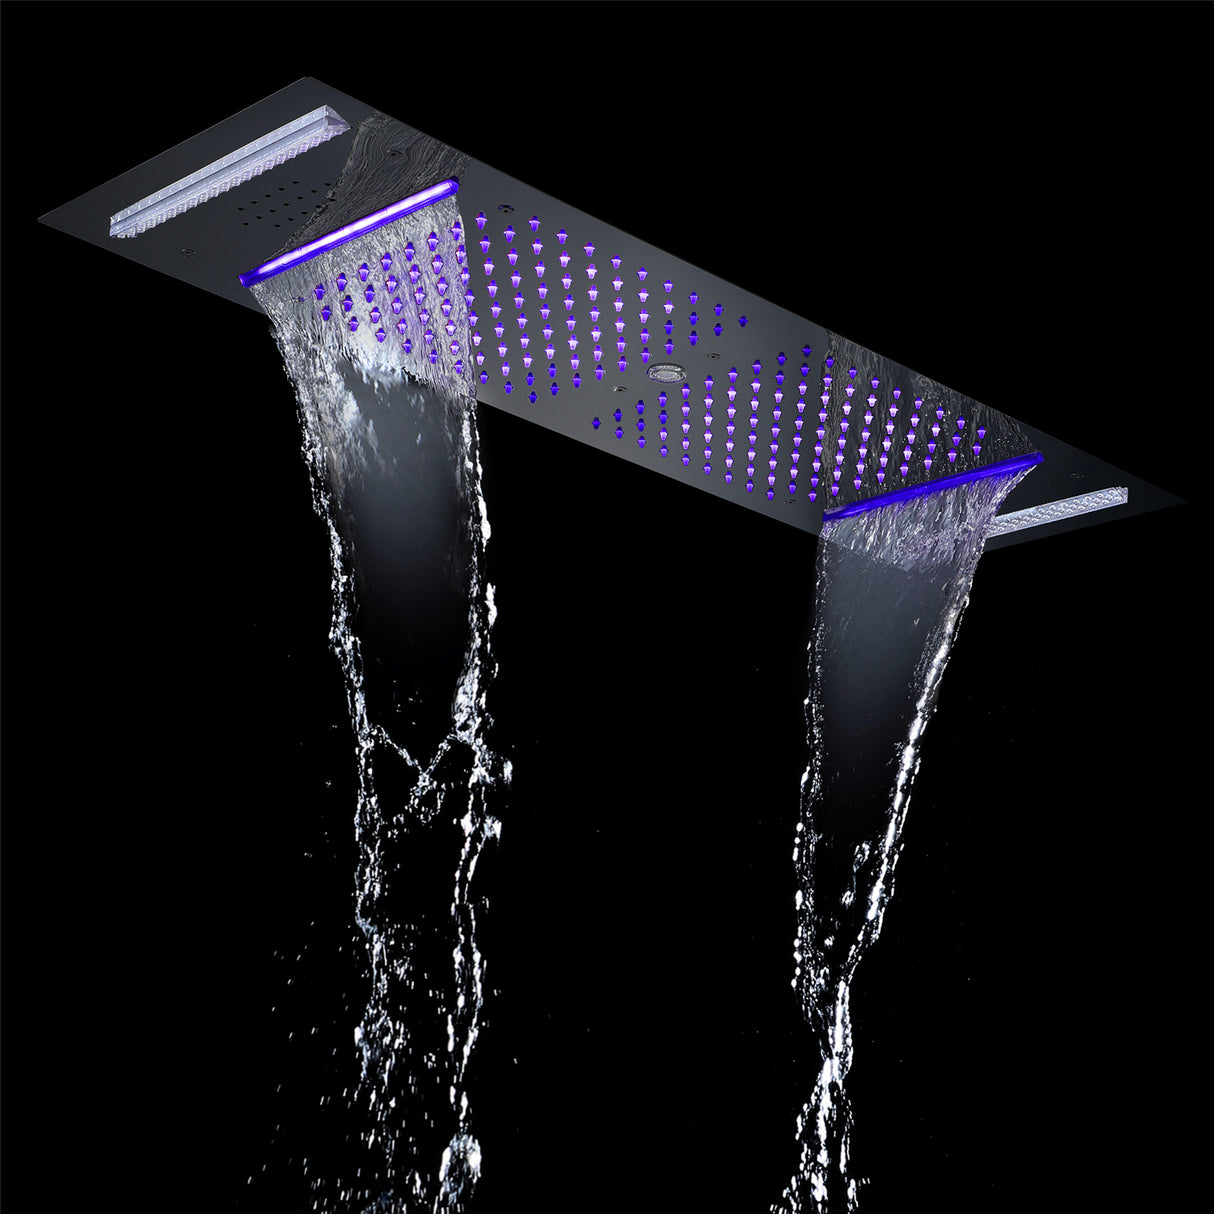 VELOCITY|36" IN COMPLETE LED MUSIC SHOWER SYSTEM